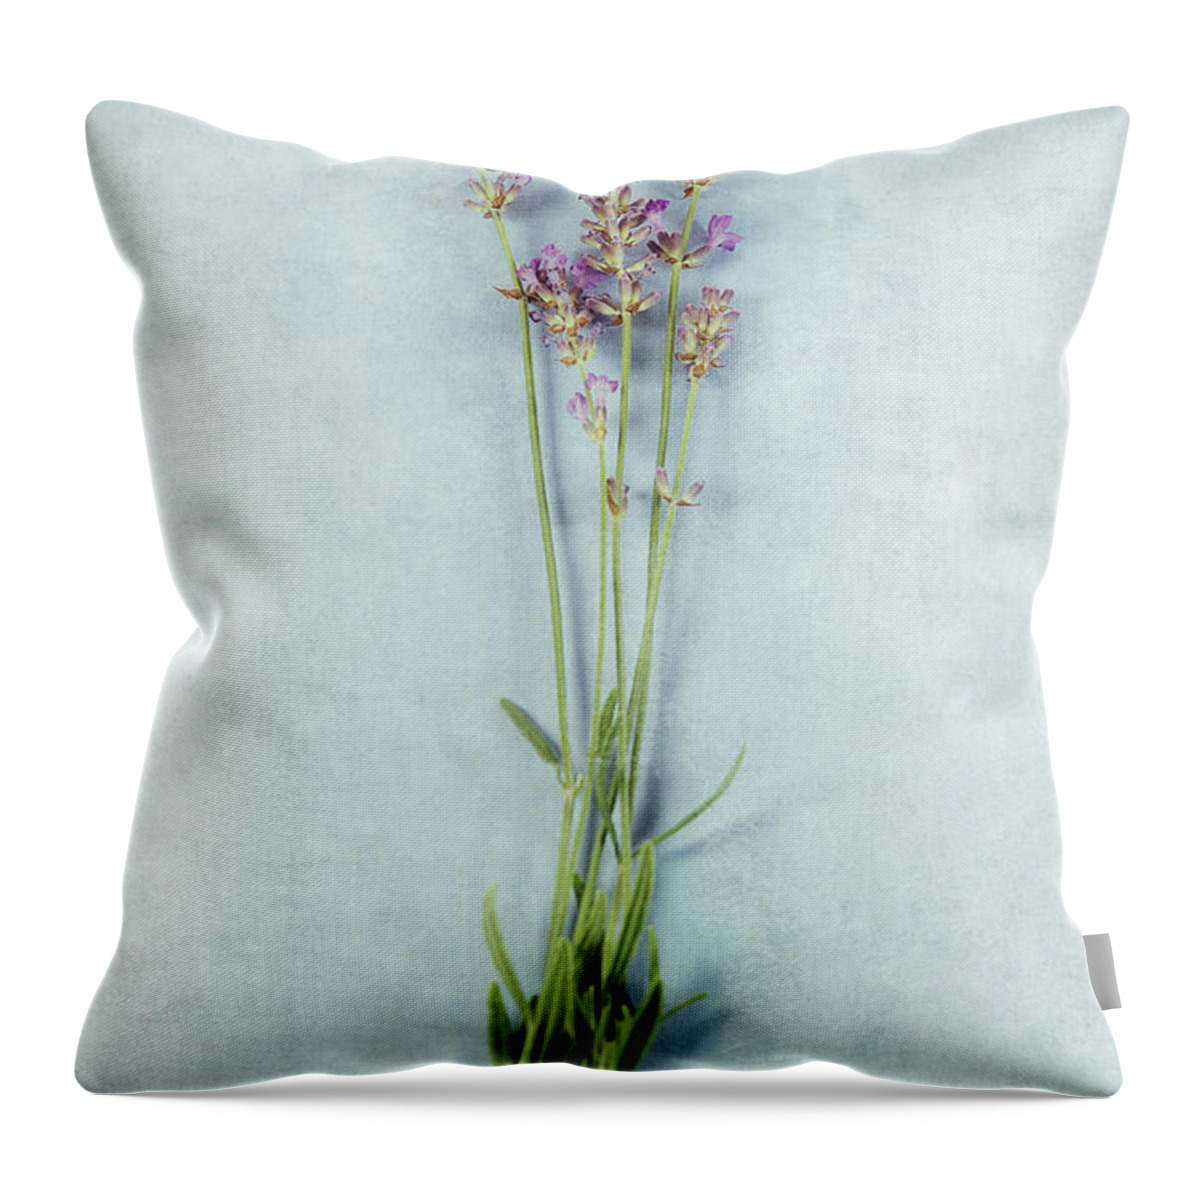 Lavender Throw Pillow featuring the photograph Lavender On Blue by HD Connelly